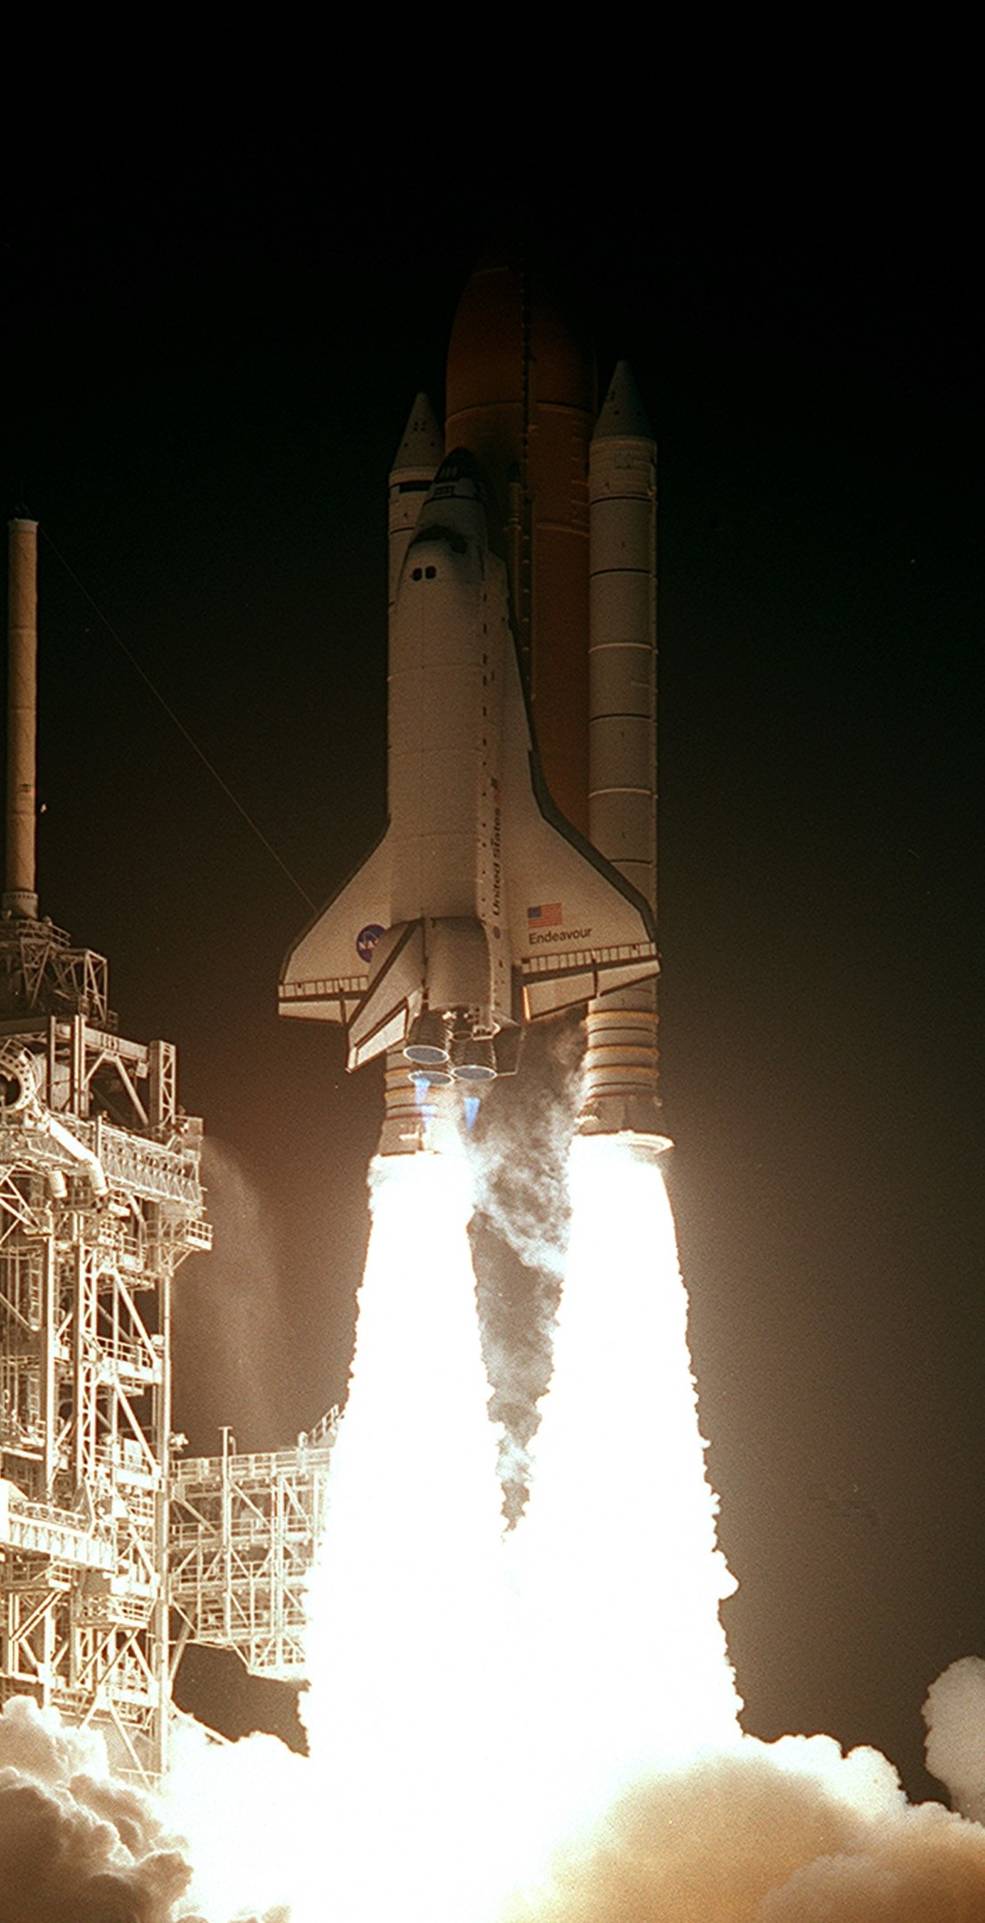 shuttle_launch_sts_88_sts088-s-006